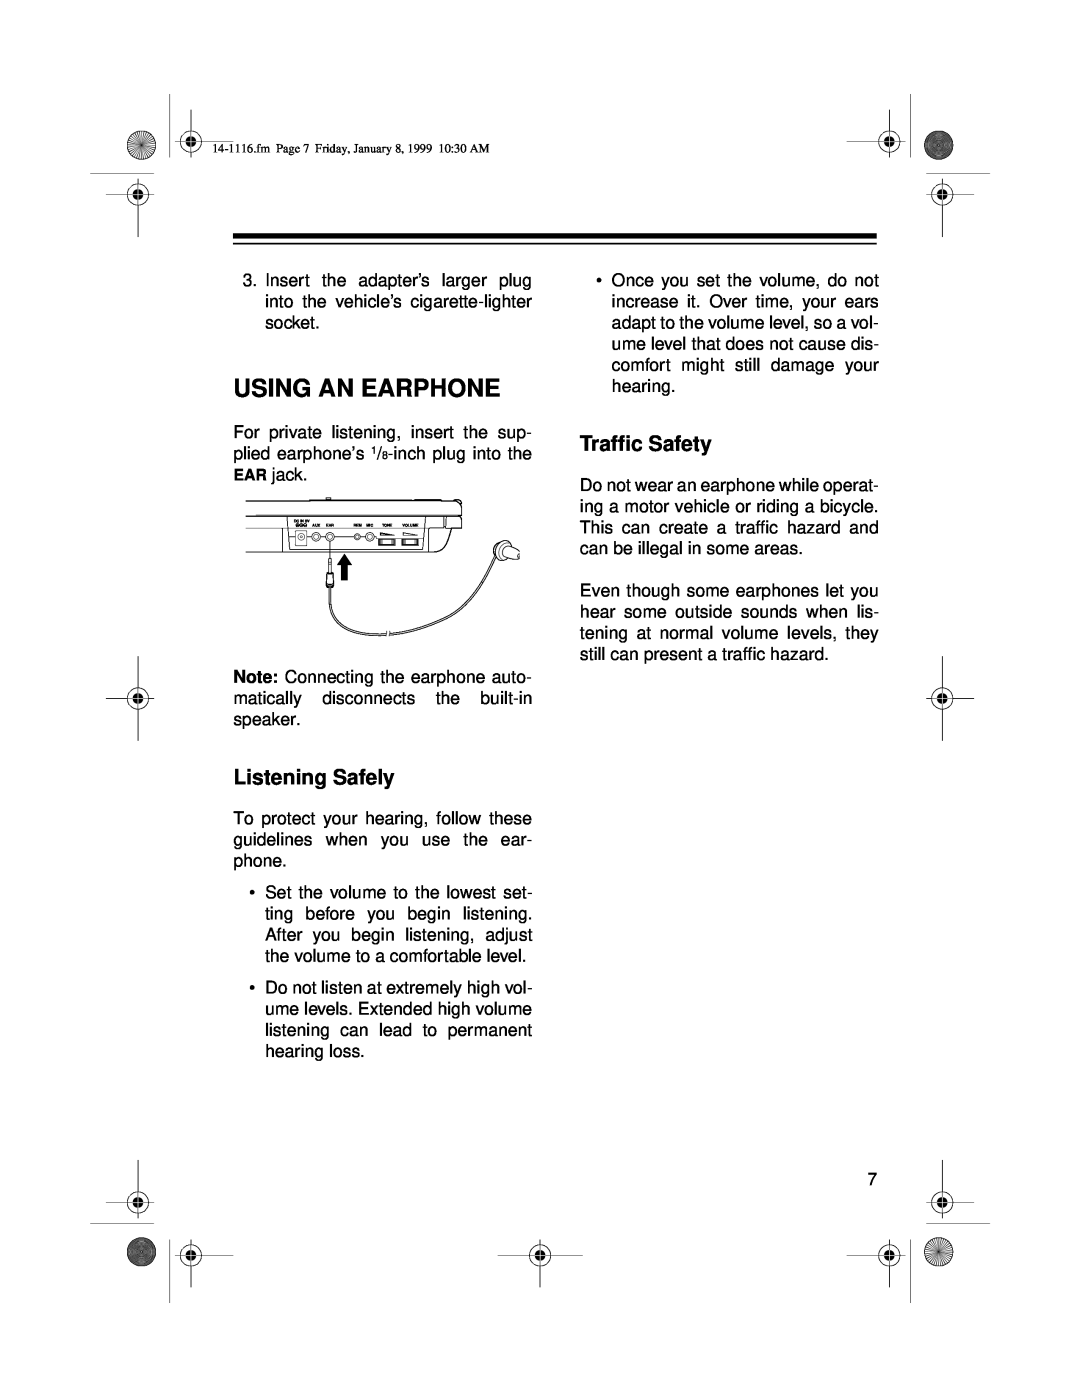 Optimus CTR-109 owner manual Using An Earphone, Traffic Safety, Listening Safely 